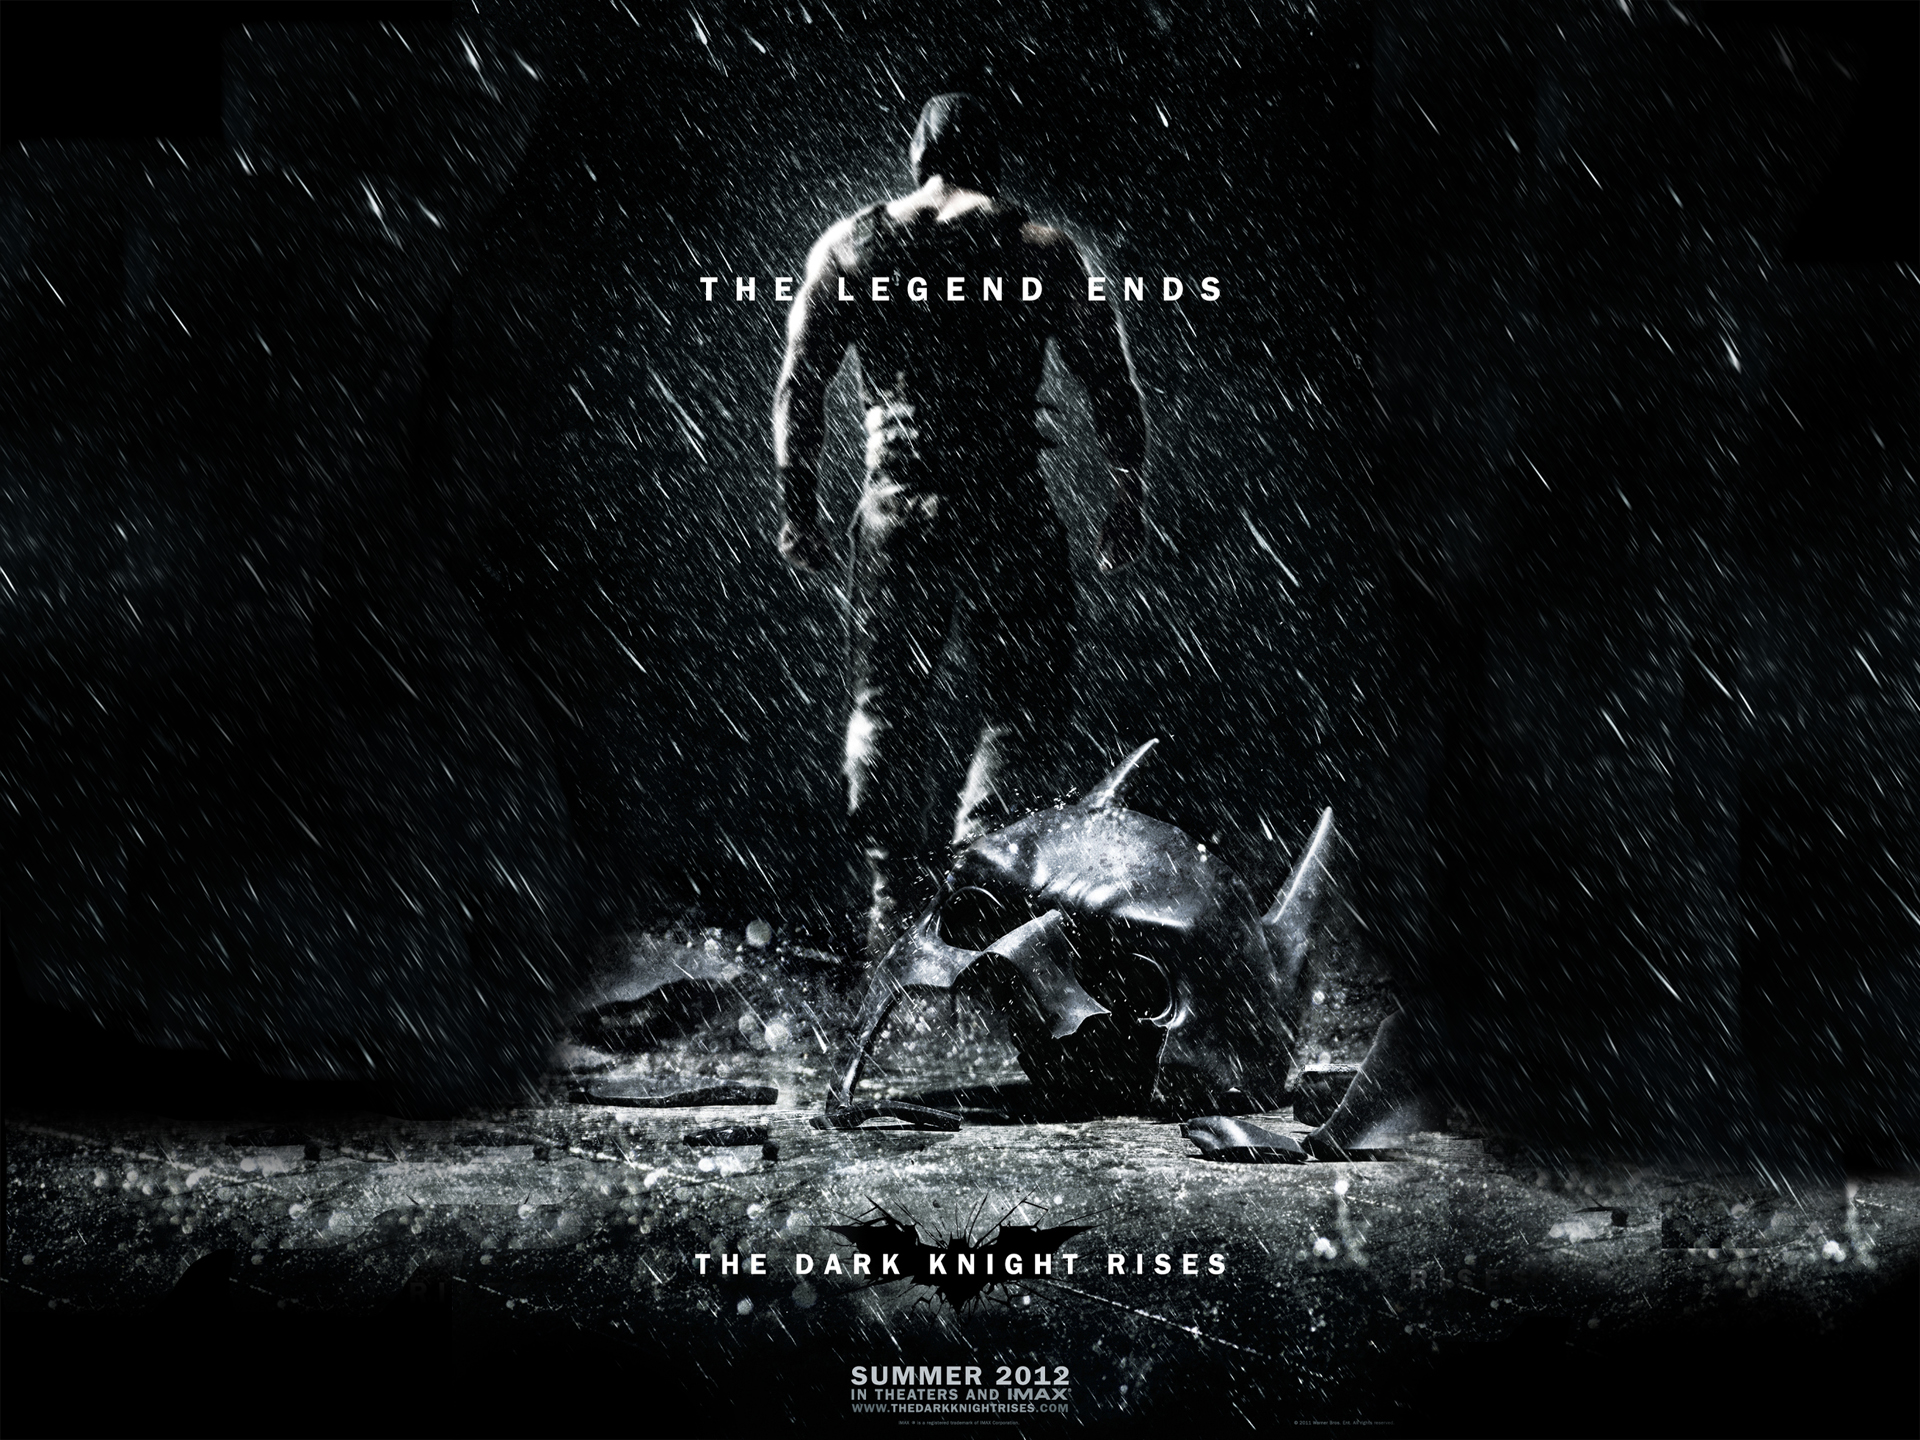 The Dark Knight Rises Two Exclusive wallpapers and the new